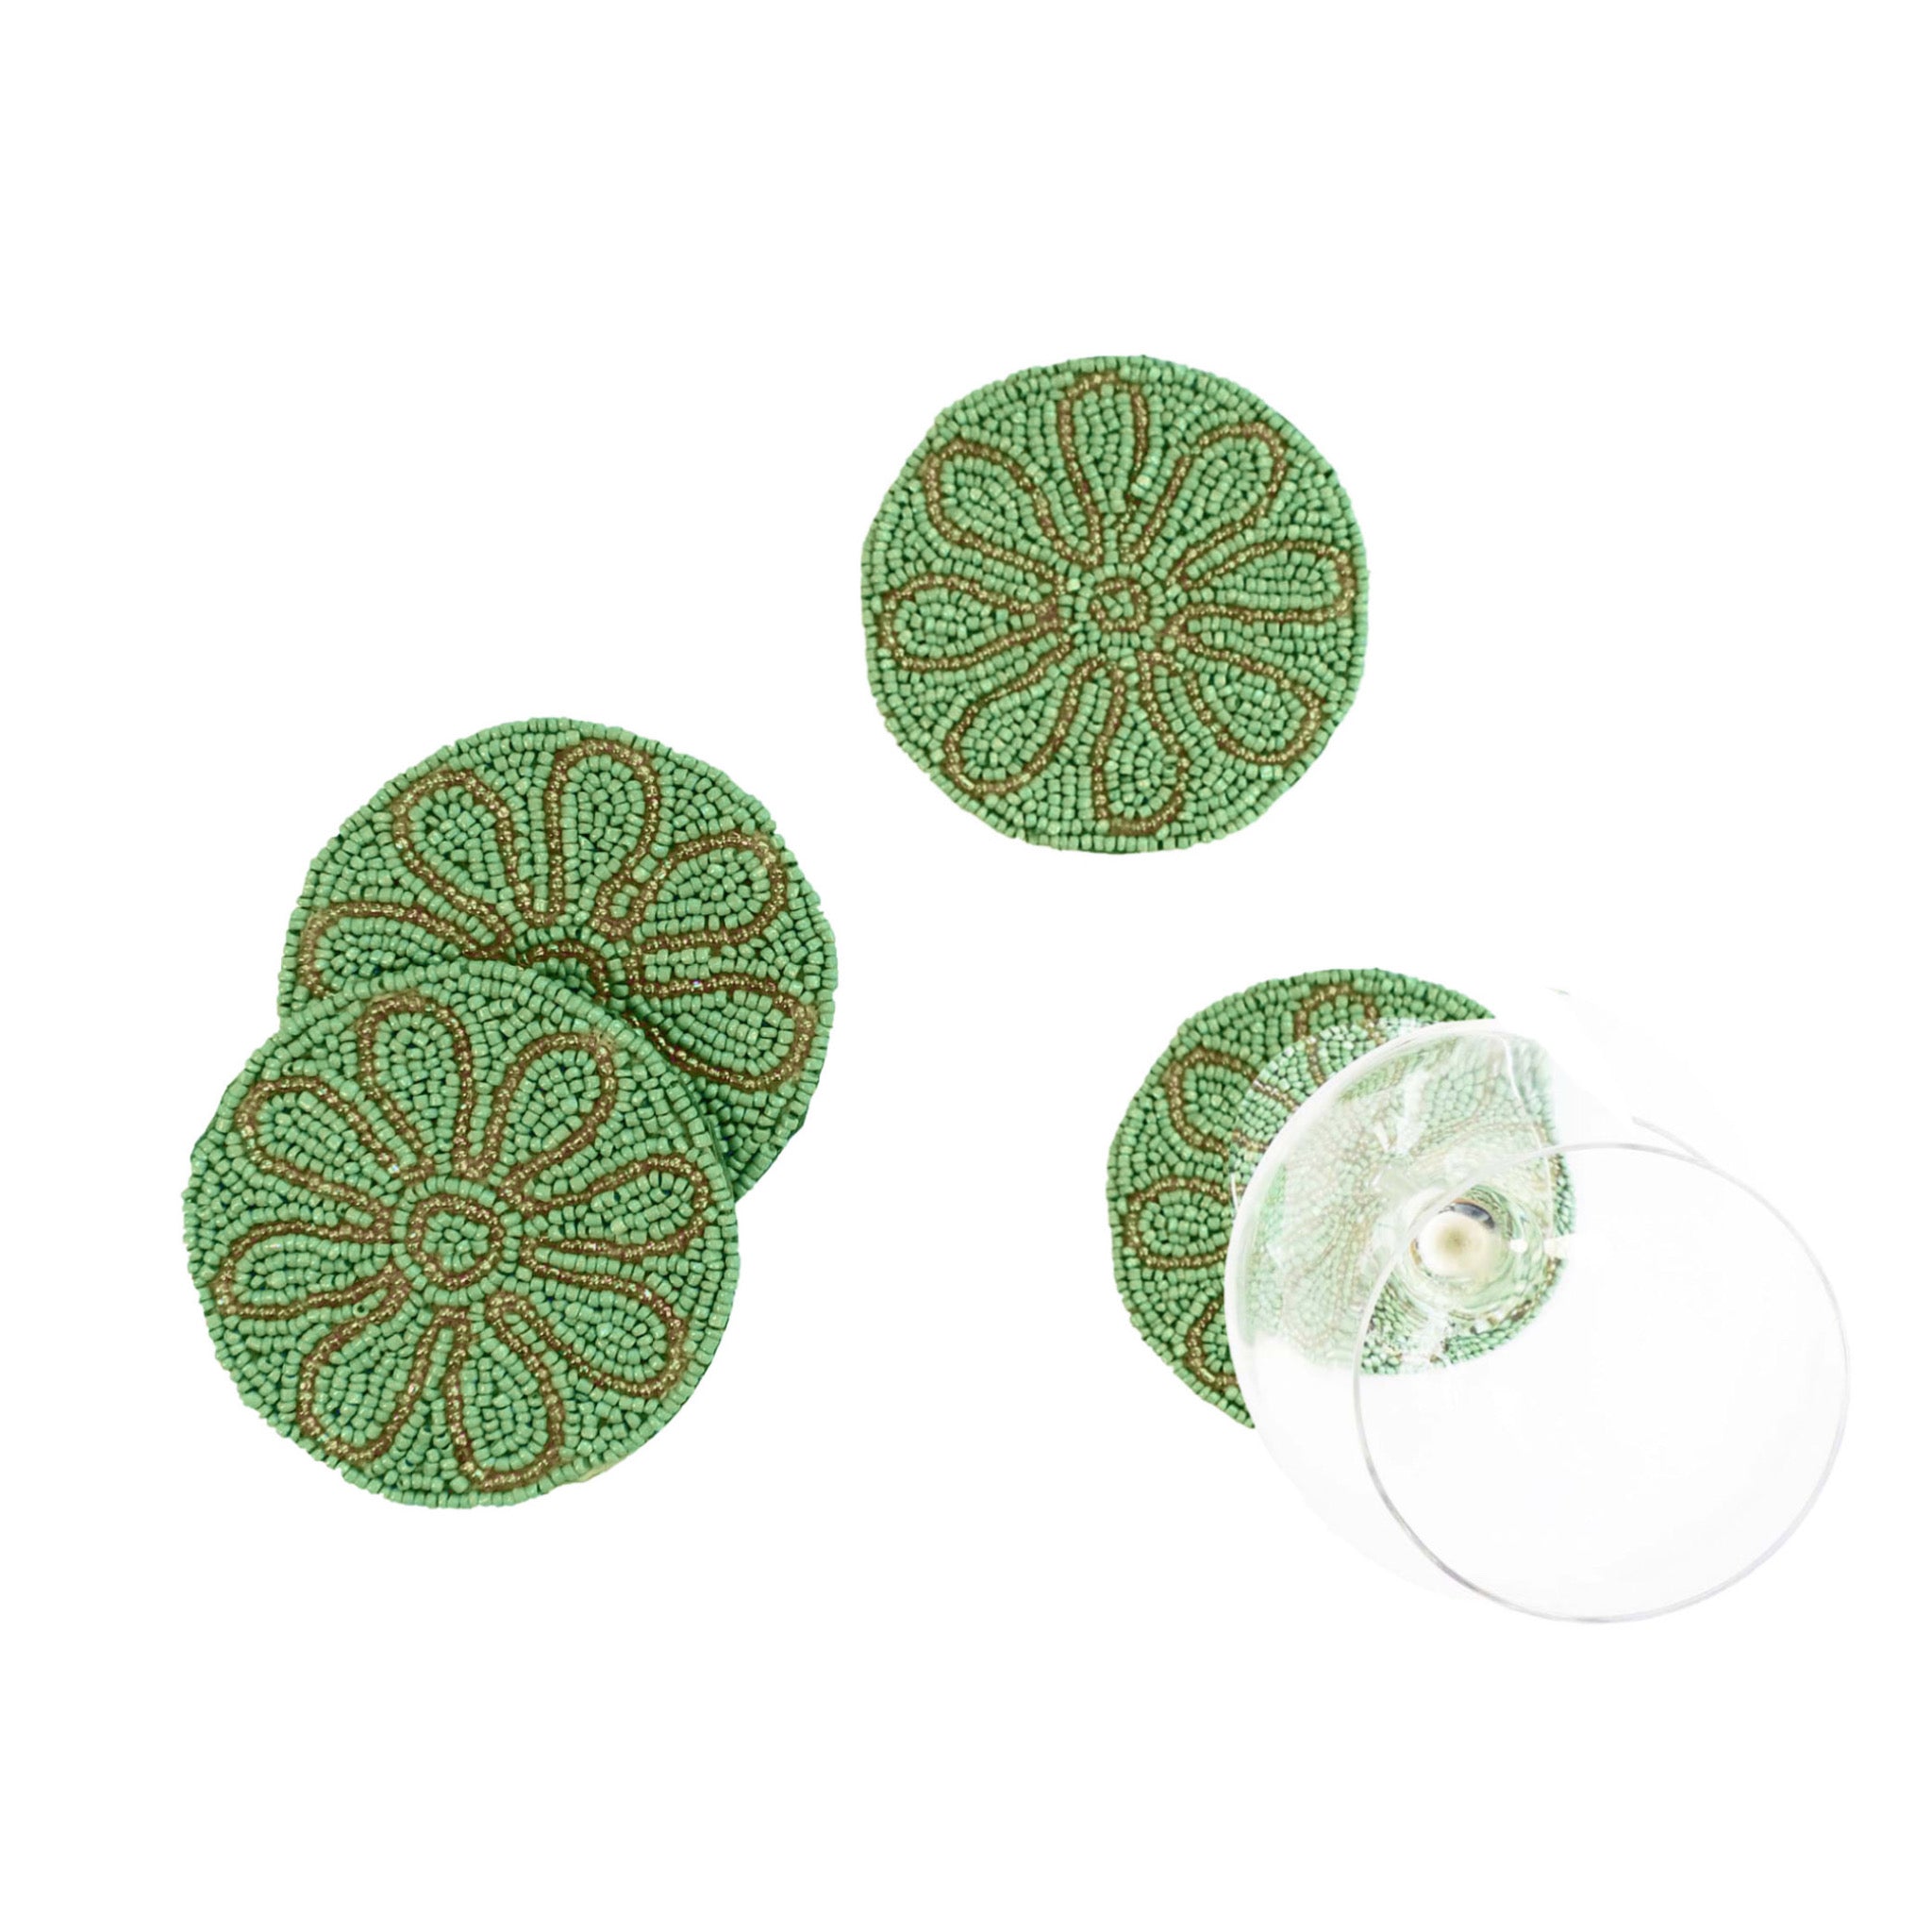 Petal Impressions Embroidered Coaster in Pale Green, Set of 4